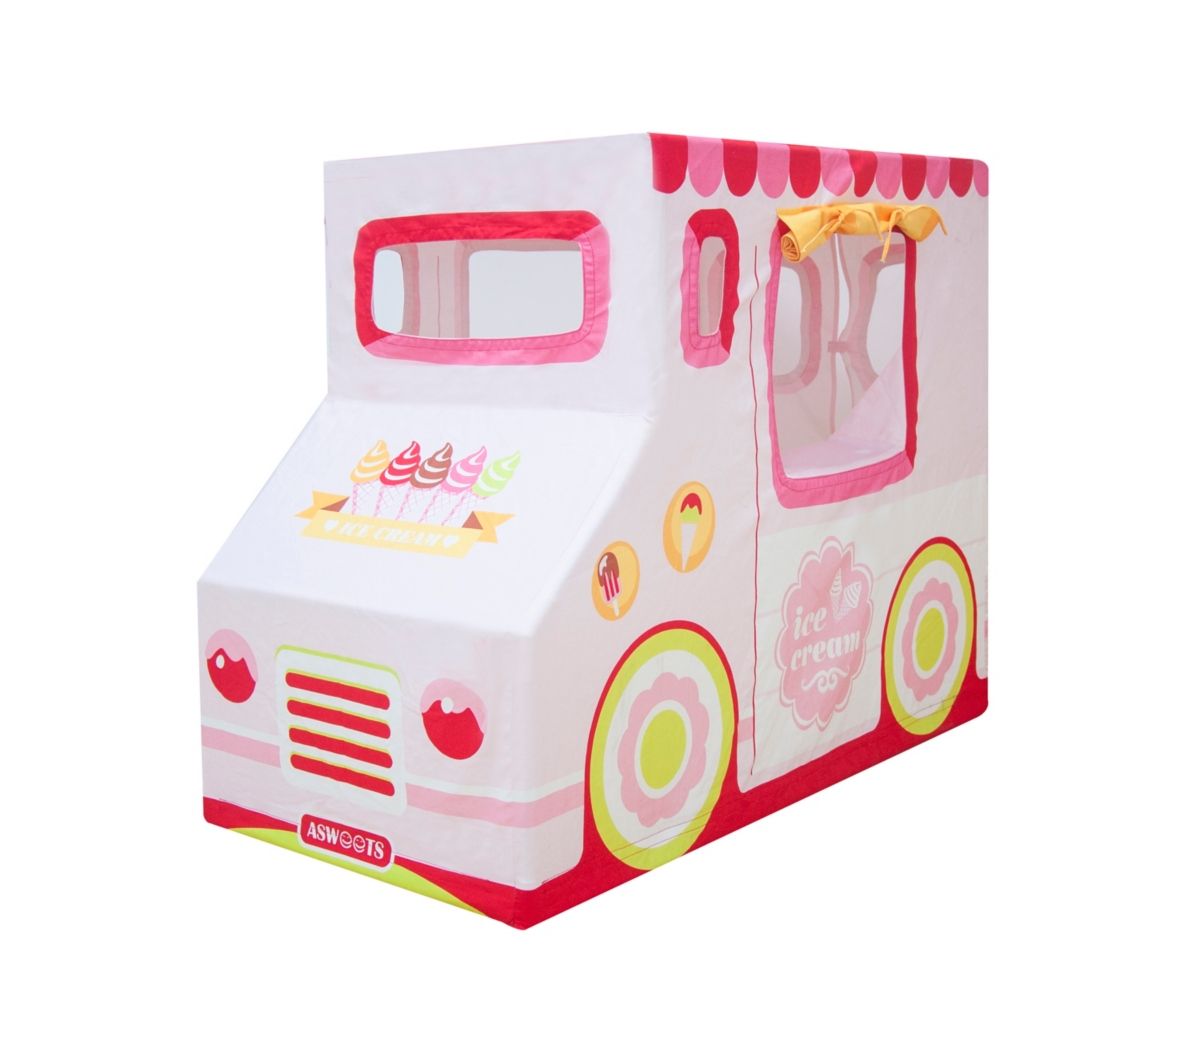 Asweets Ice Cream Truck Indoor Canvas Playhouse Play Tent For Kids | Macys (US)